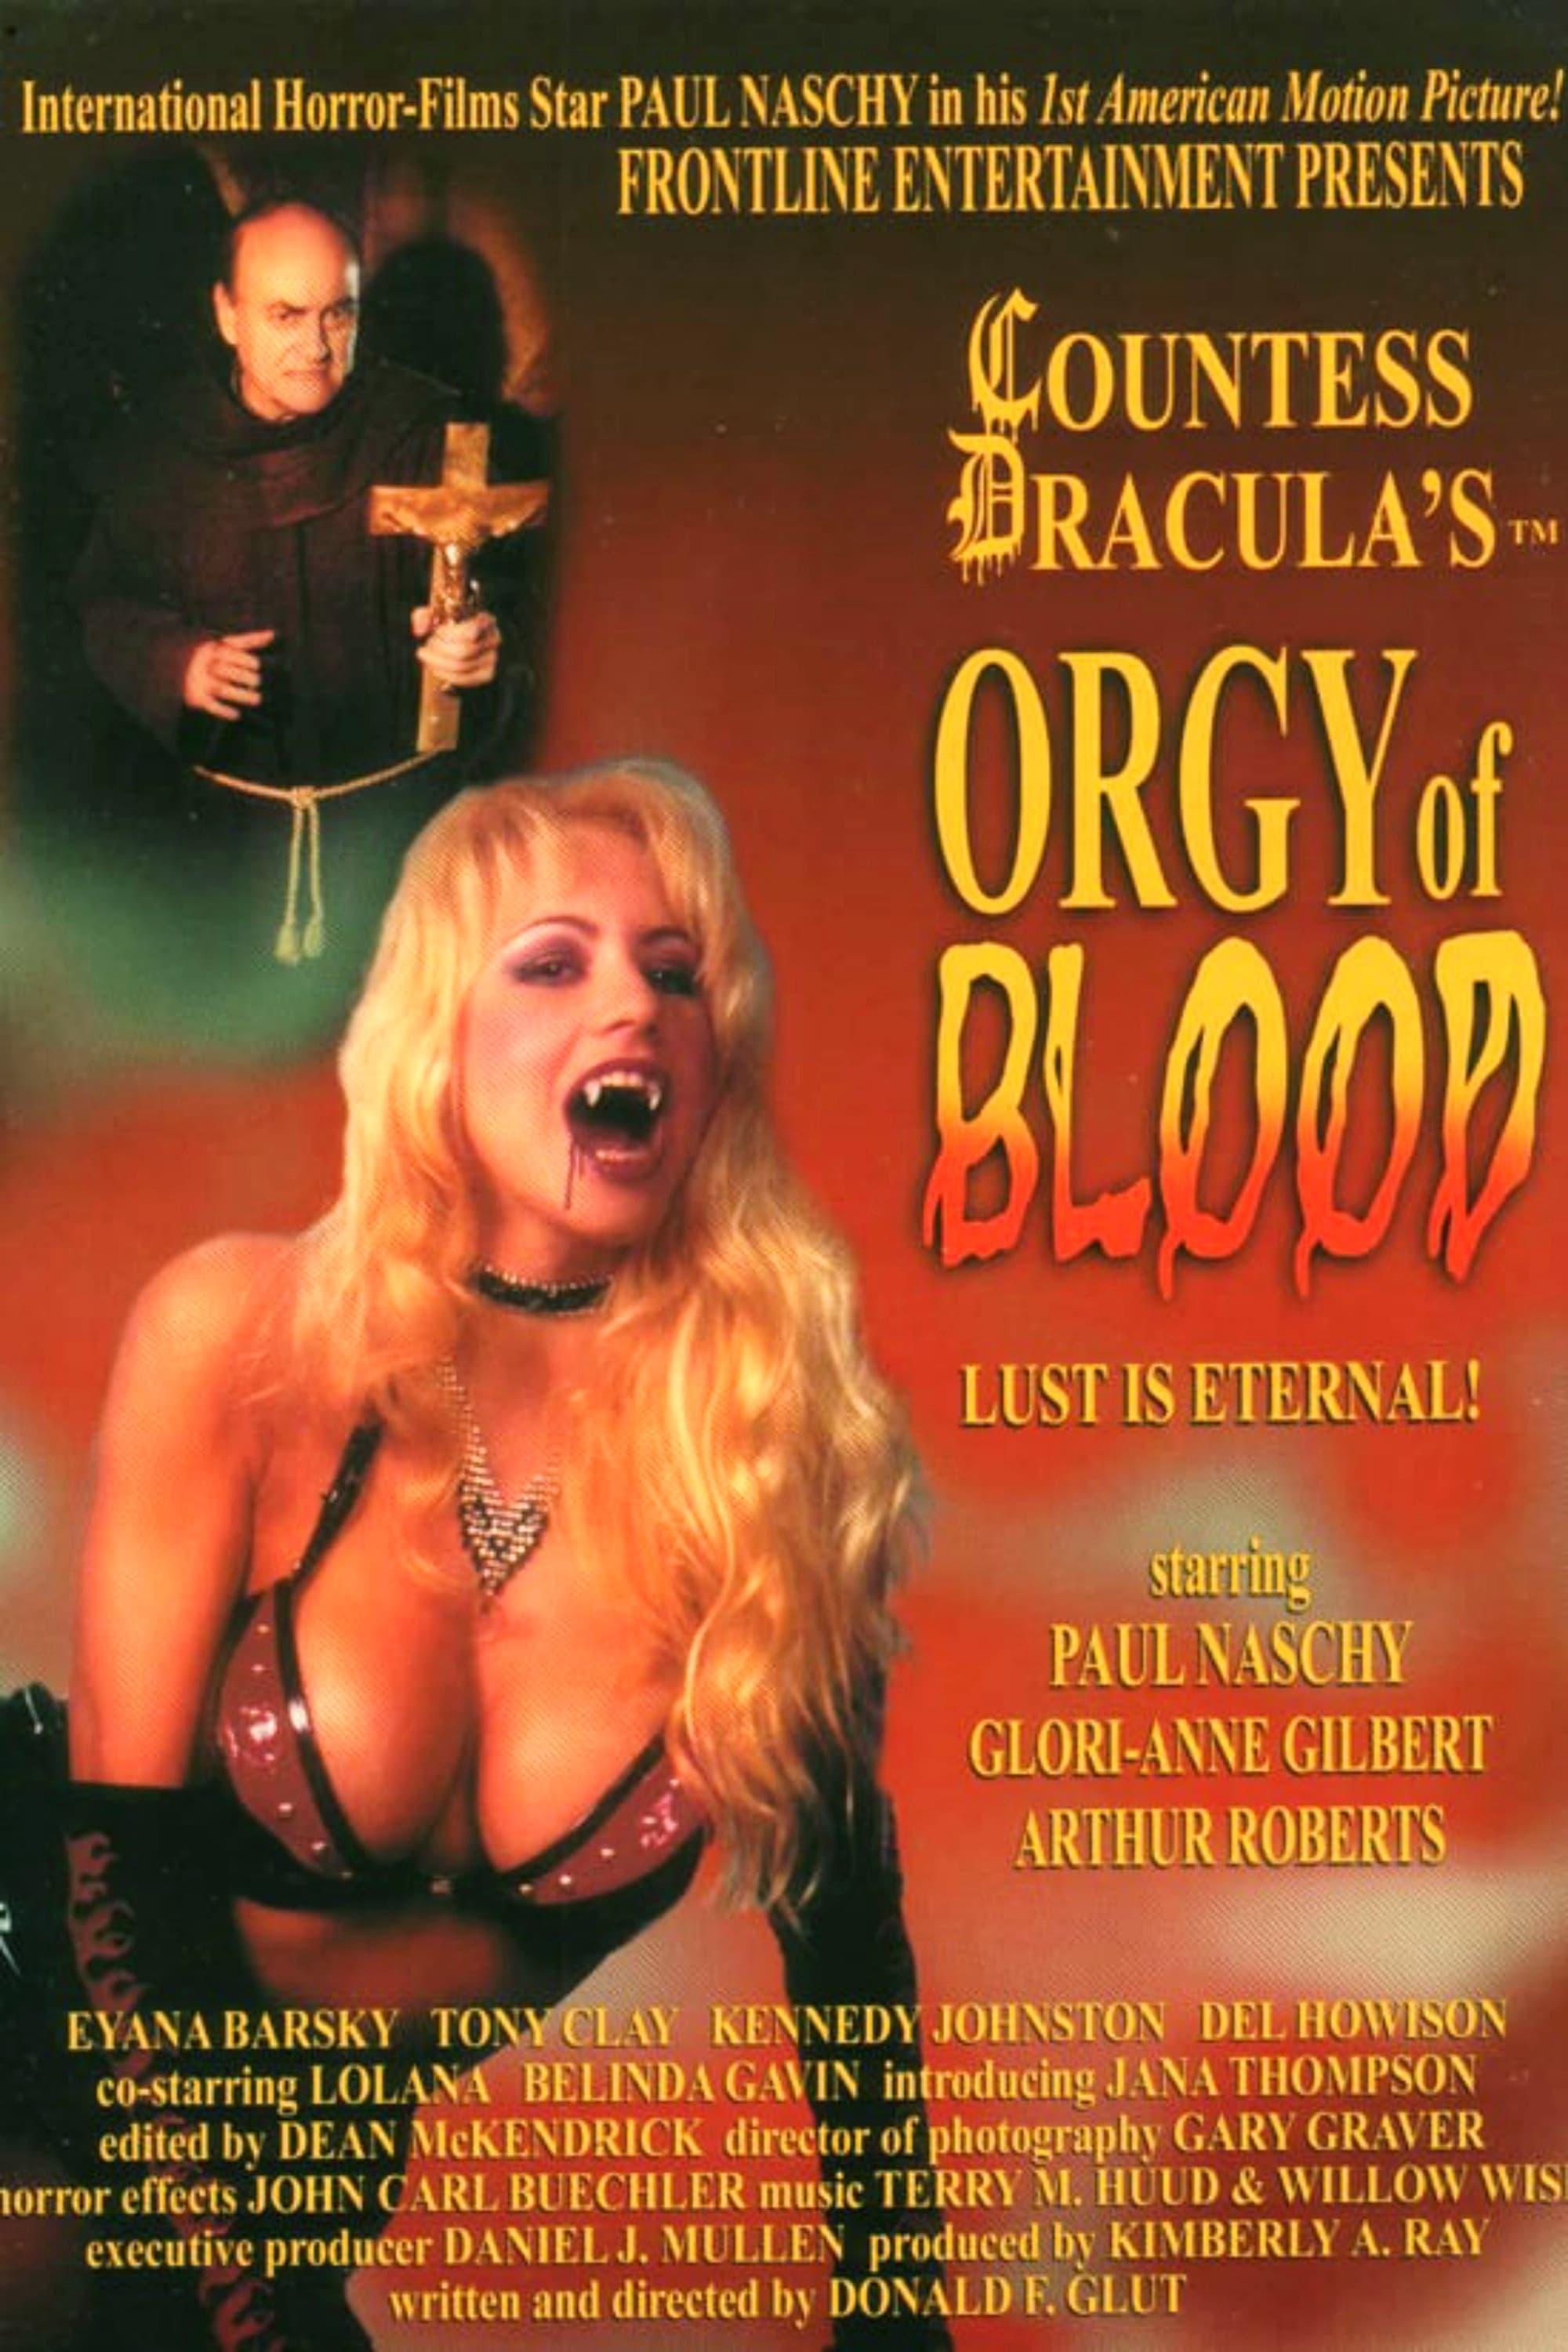 Countess Dracula's Orgy of Blood poster